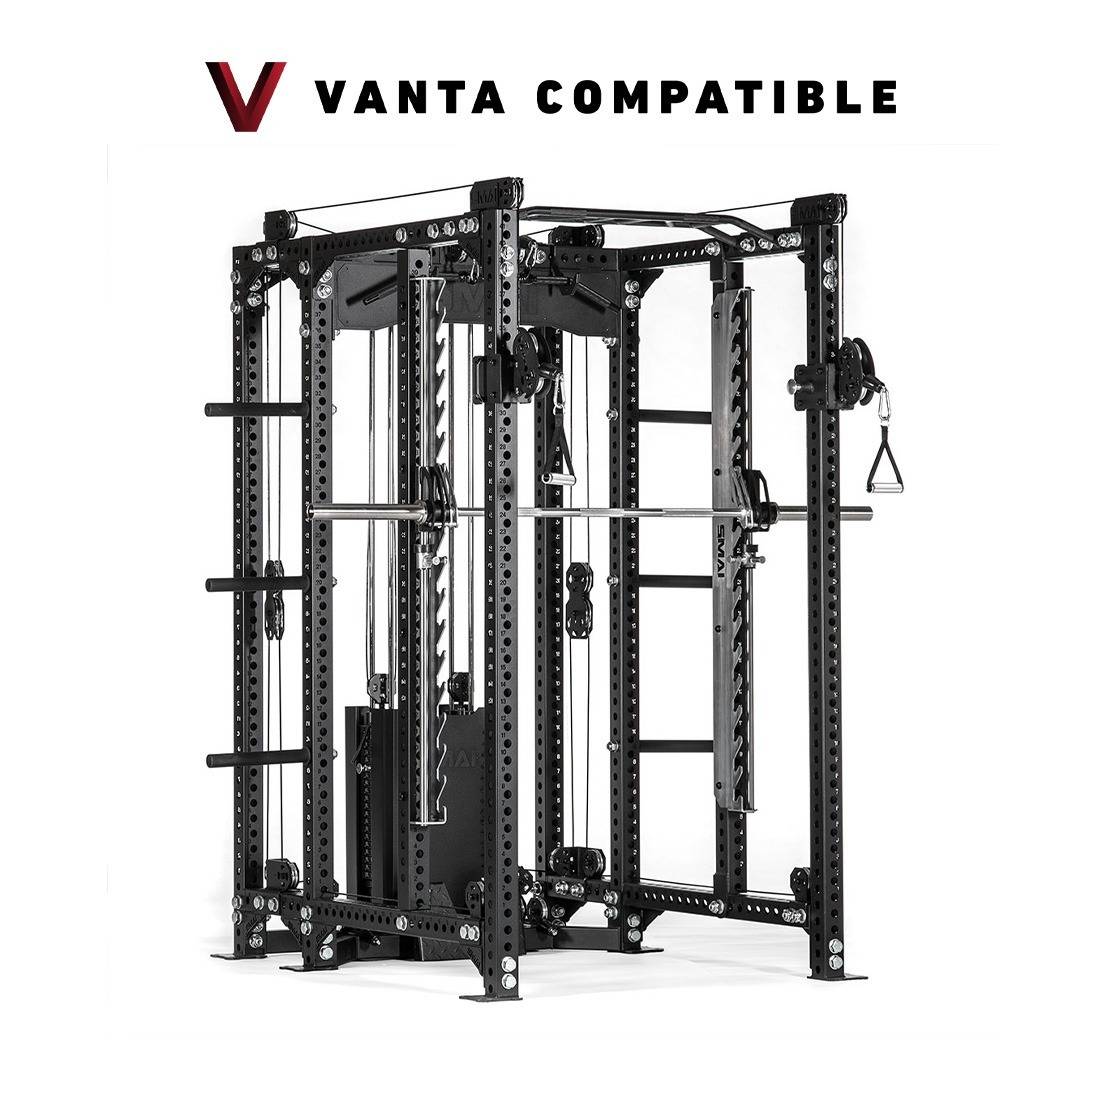 All In 1 Trainer - Power Rack w/ Cable Trainer, Smith Machine & Accessory Pack - Vanta Series